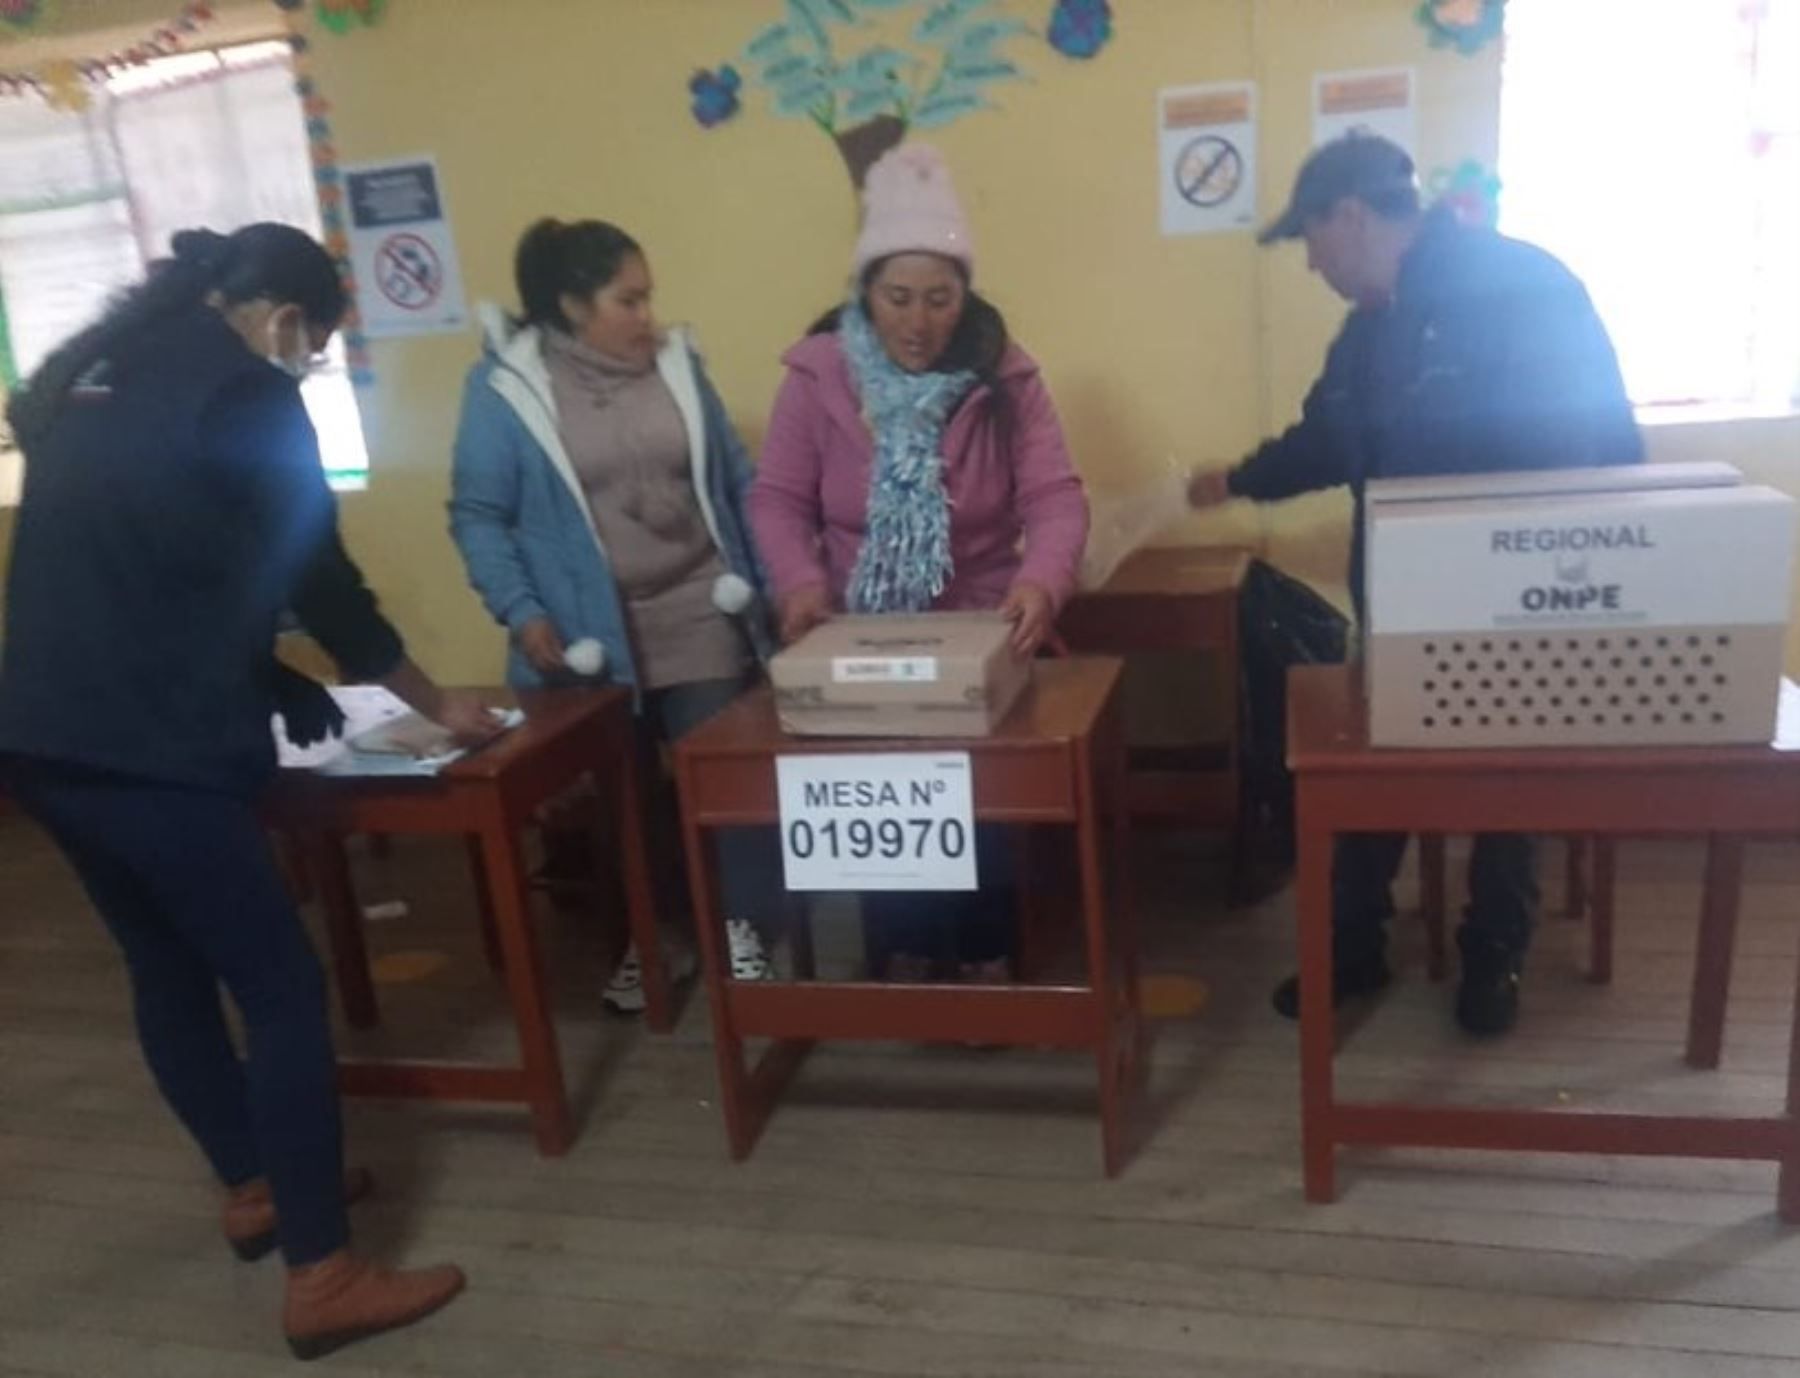 The first voting table was installed at 4:30 in the morning (Twitter @LaPrimeraPE)